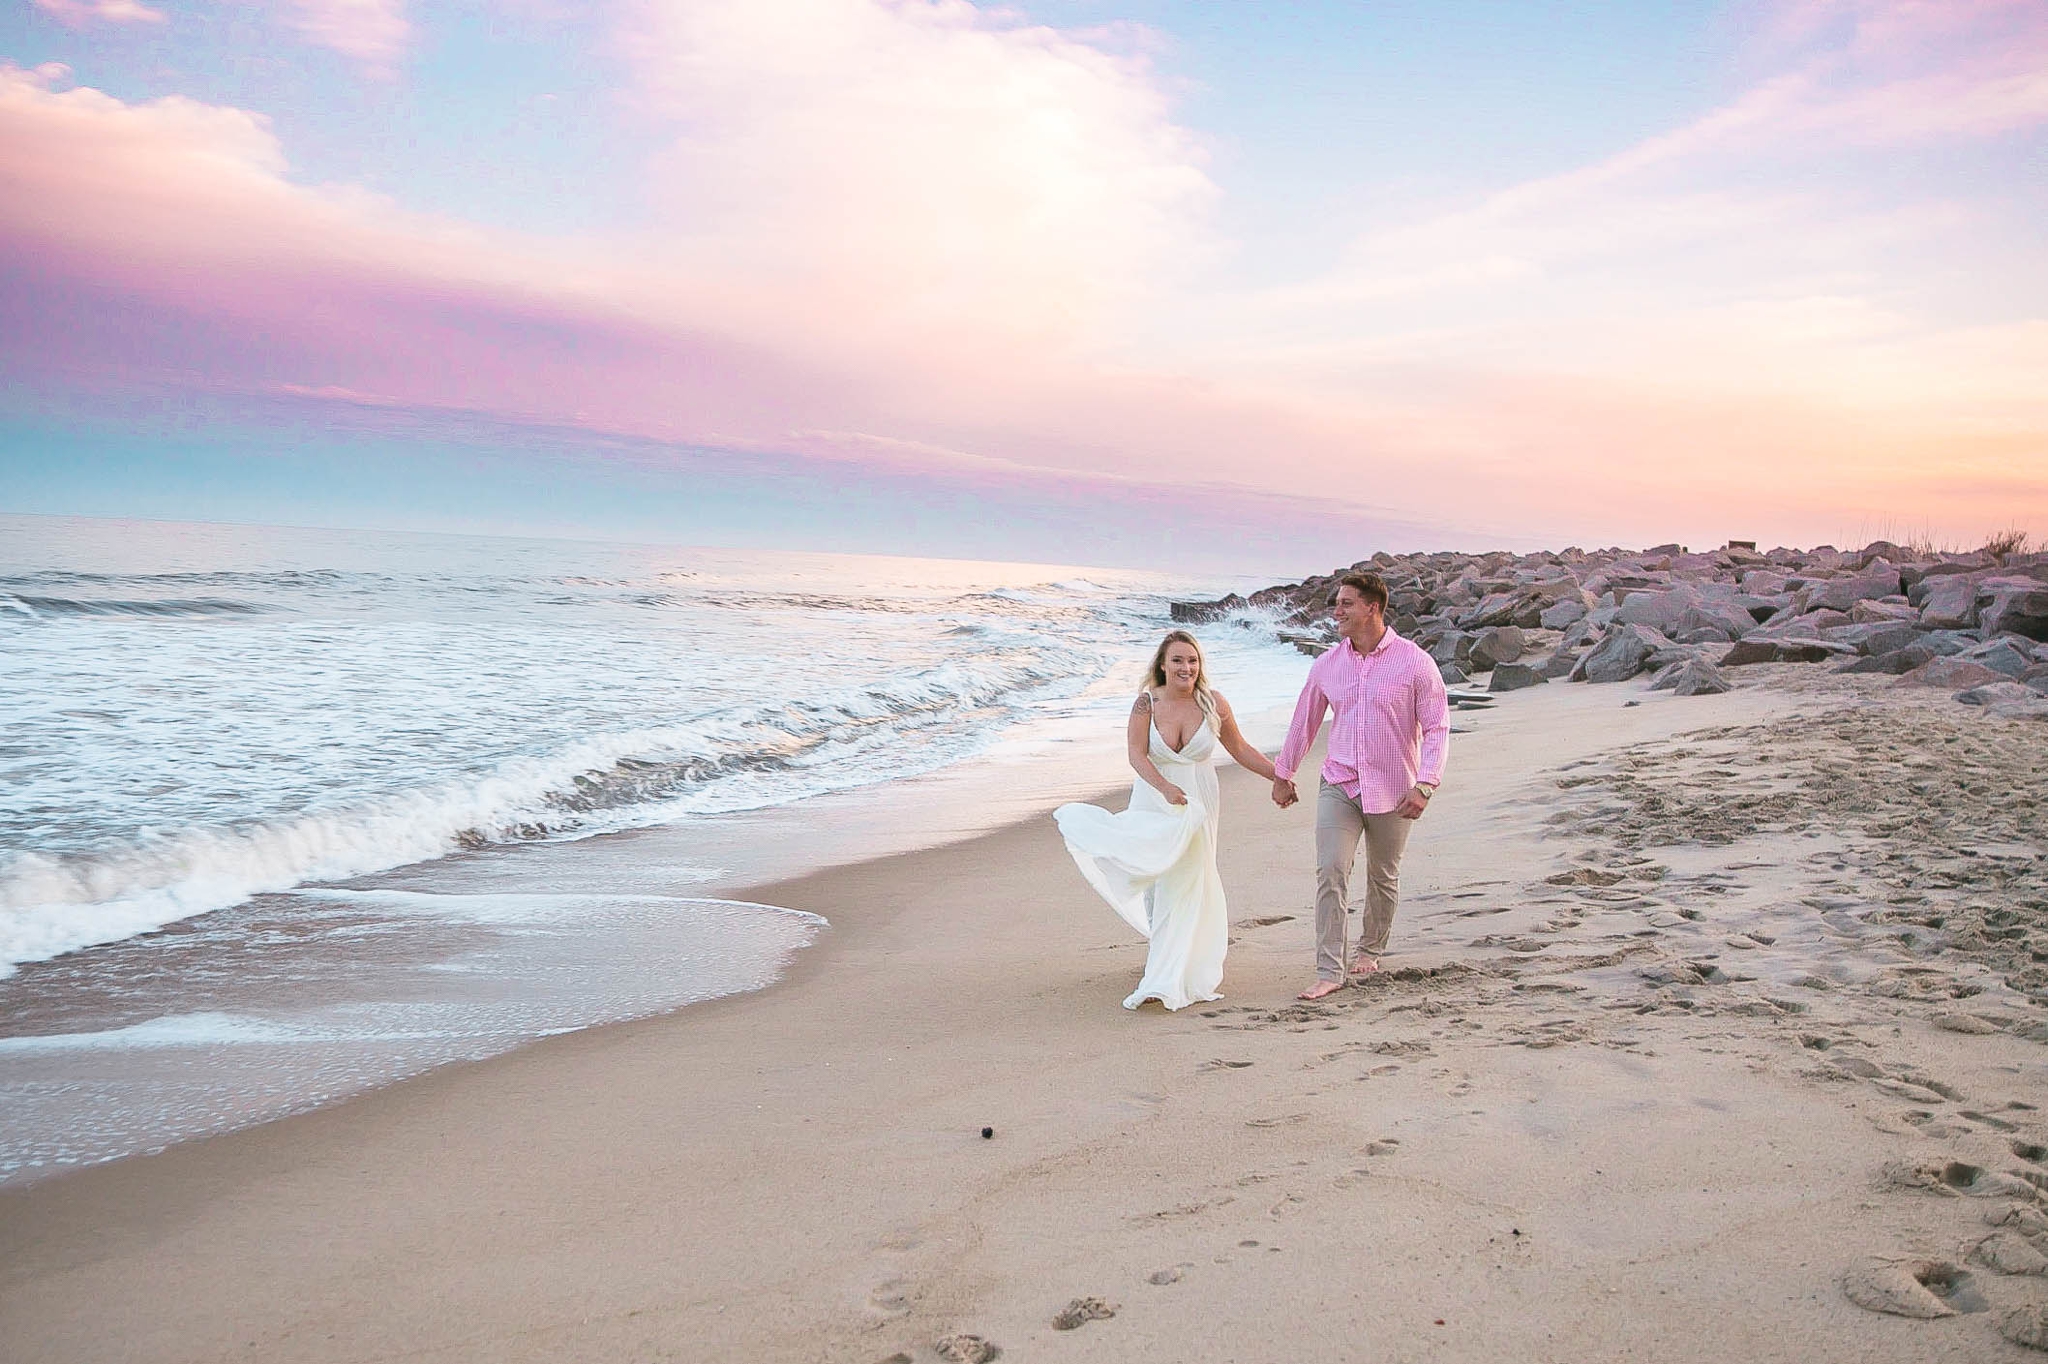  Romantic Engagement Photography Session at the beach during sunset with a cotton candy sky - couple is walking in the sand - girl is wearing a white flowy maxi dress from lulus - Honolulu Oahu Hawaii Wedding Photographer - Johanna Dye 